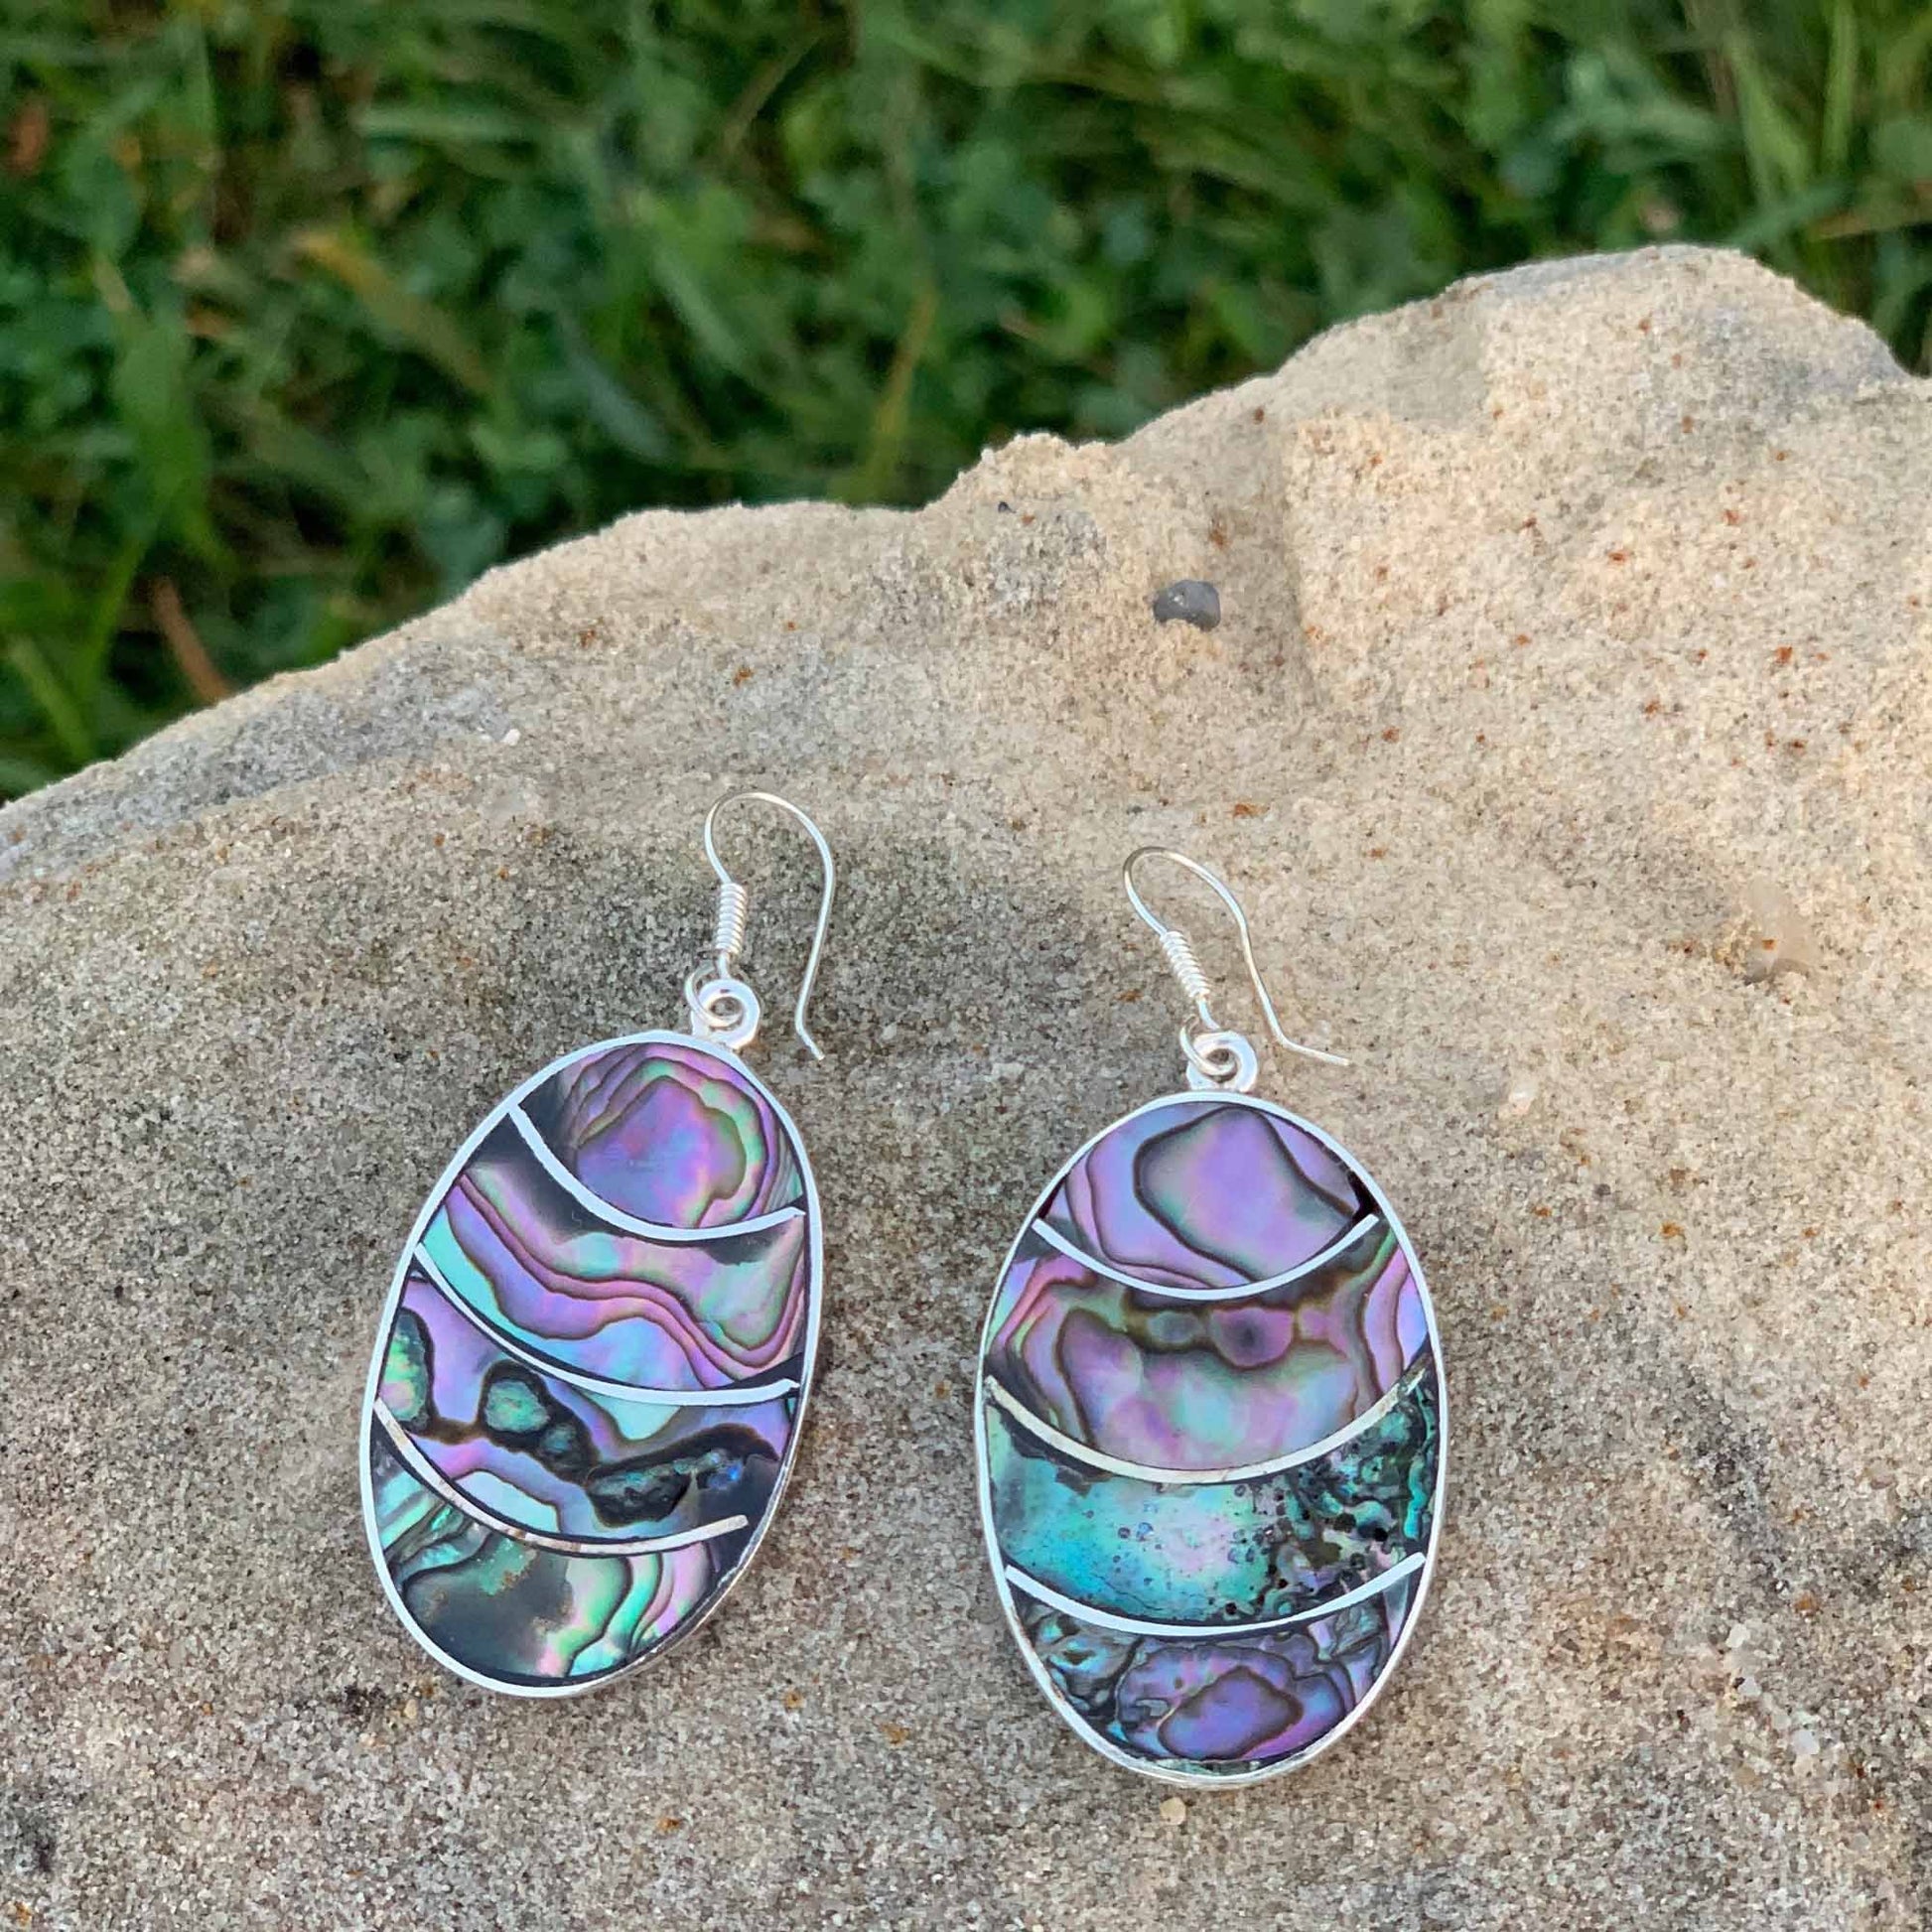 Oval Banded Abalone Shell Earrings - Linda Kay Gifford’s - Those Nasty Women TALK! by SWEETSurvivor